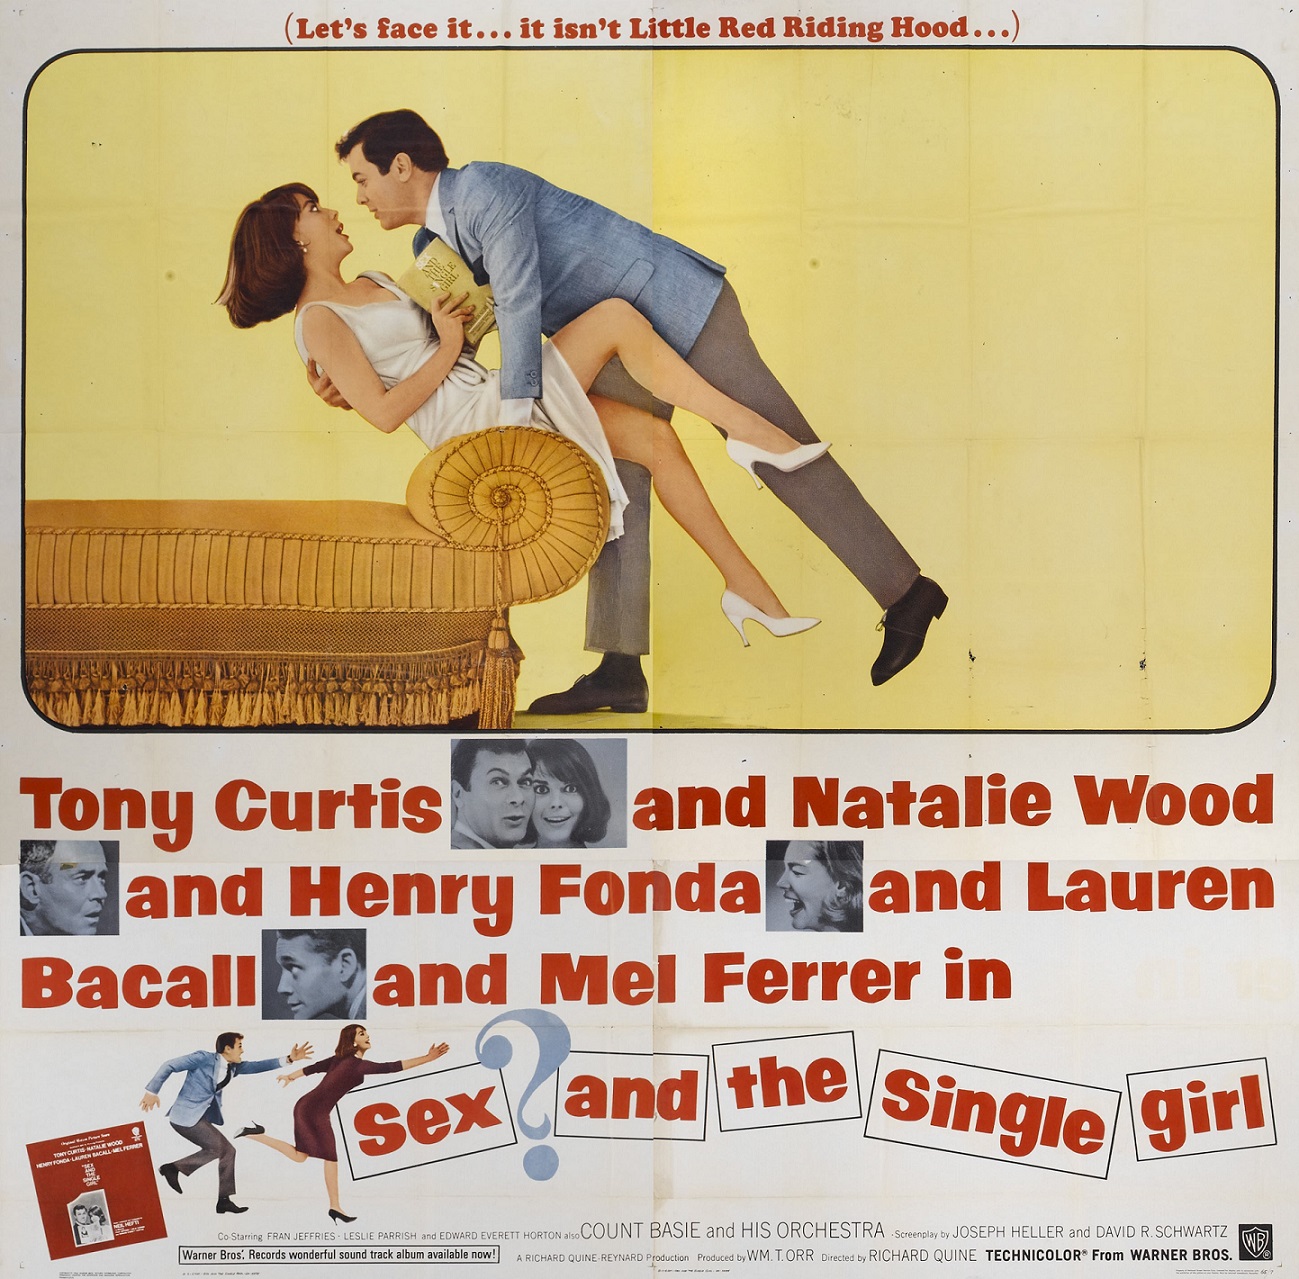 SEX AND THE SINGLE GIRL (1964) WEB SITE